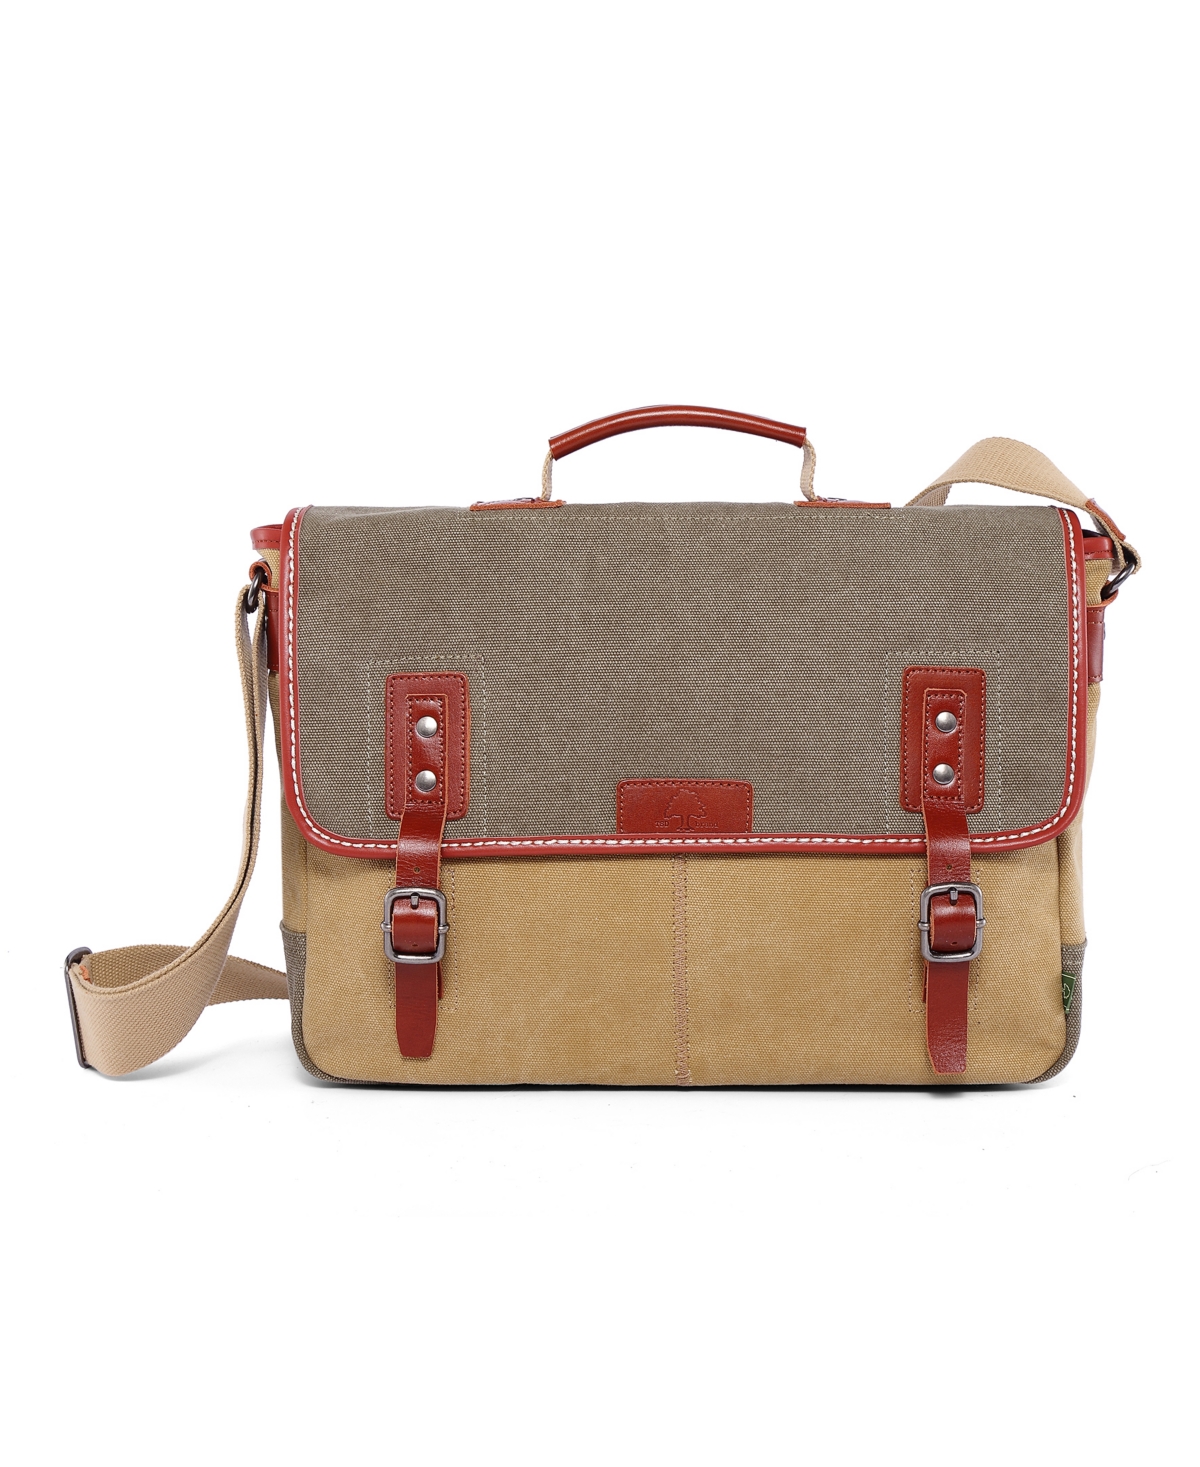 Tsd Brand Mountain Wood Canvas Messenger Bag In Olive